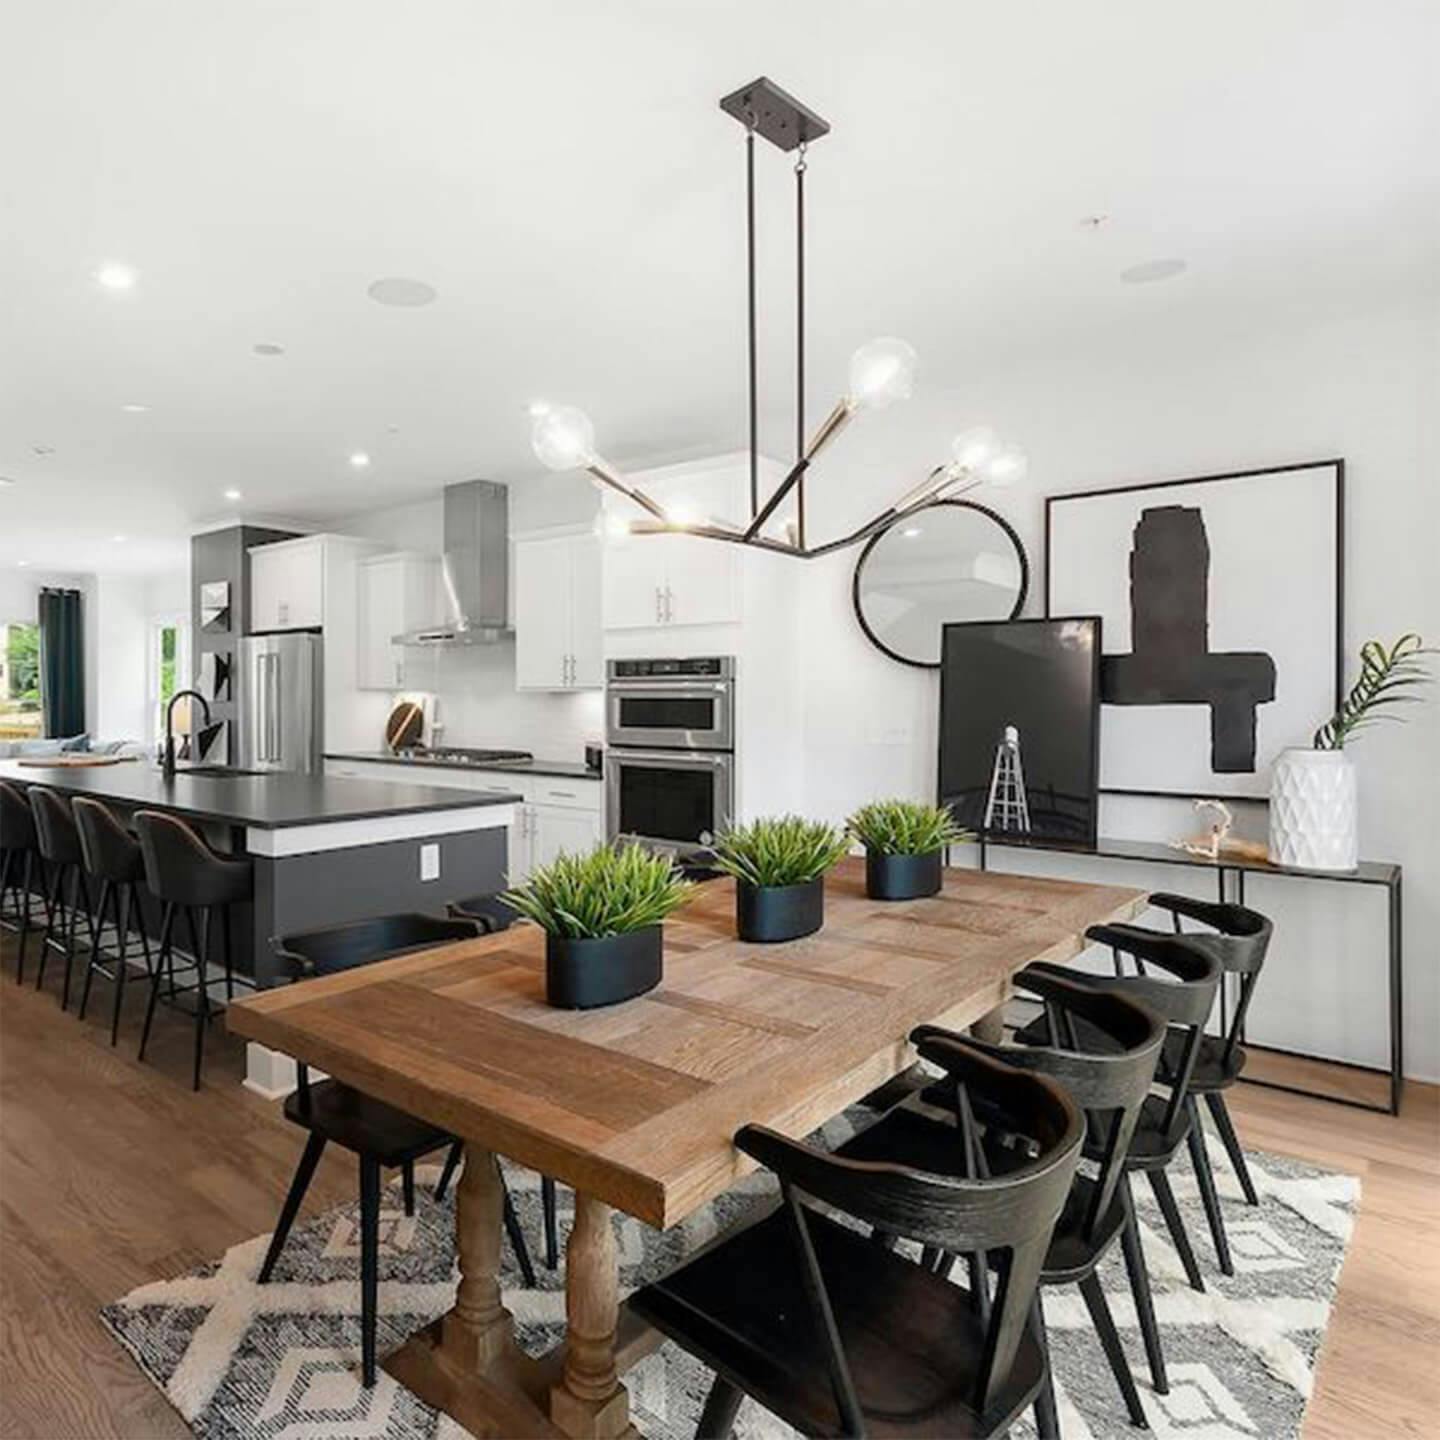 Dining room in modern kitchen with chandelier over table